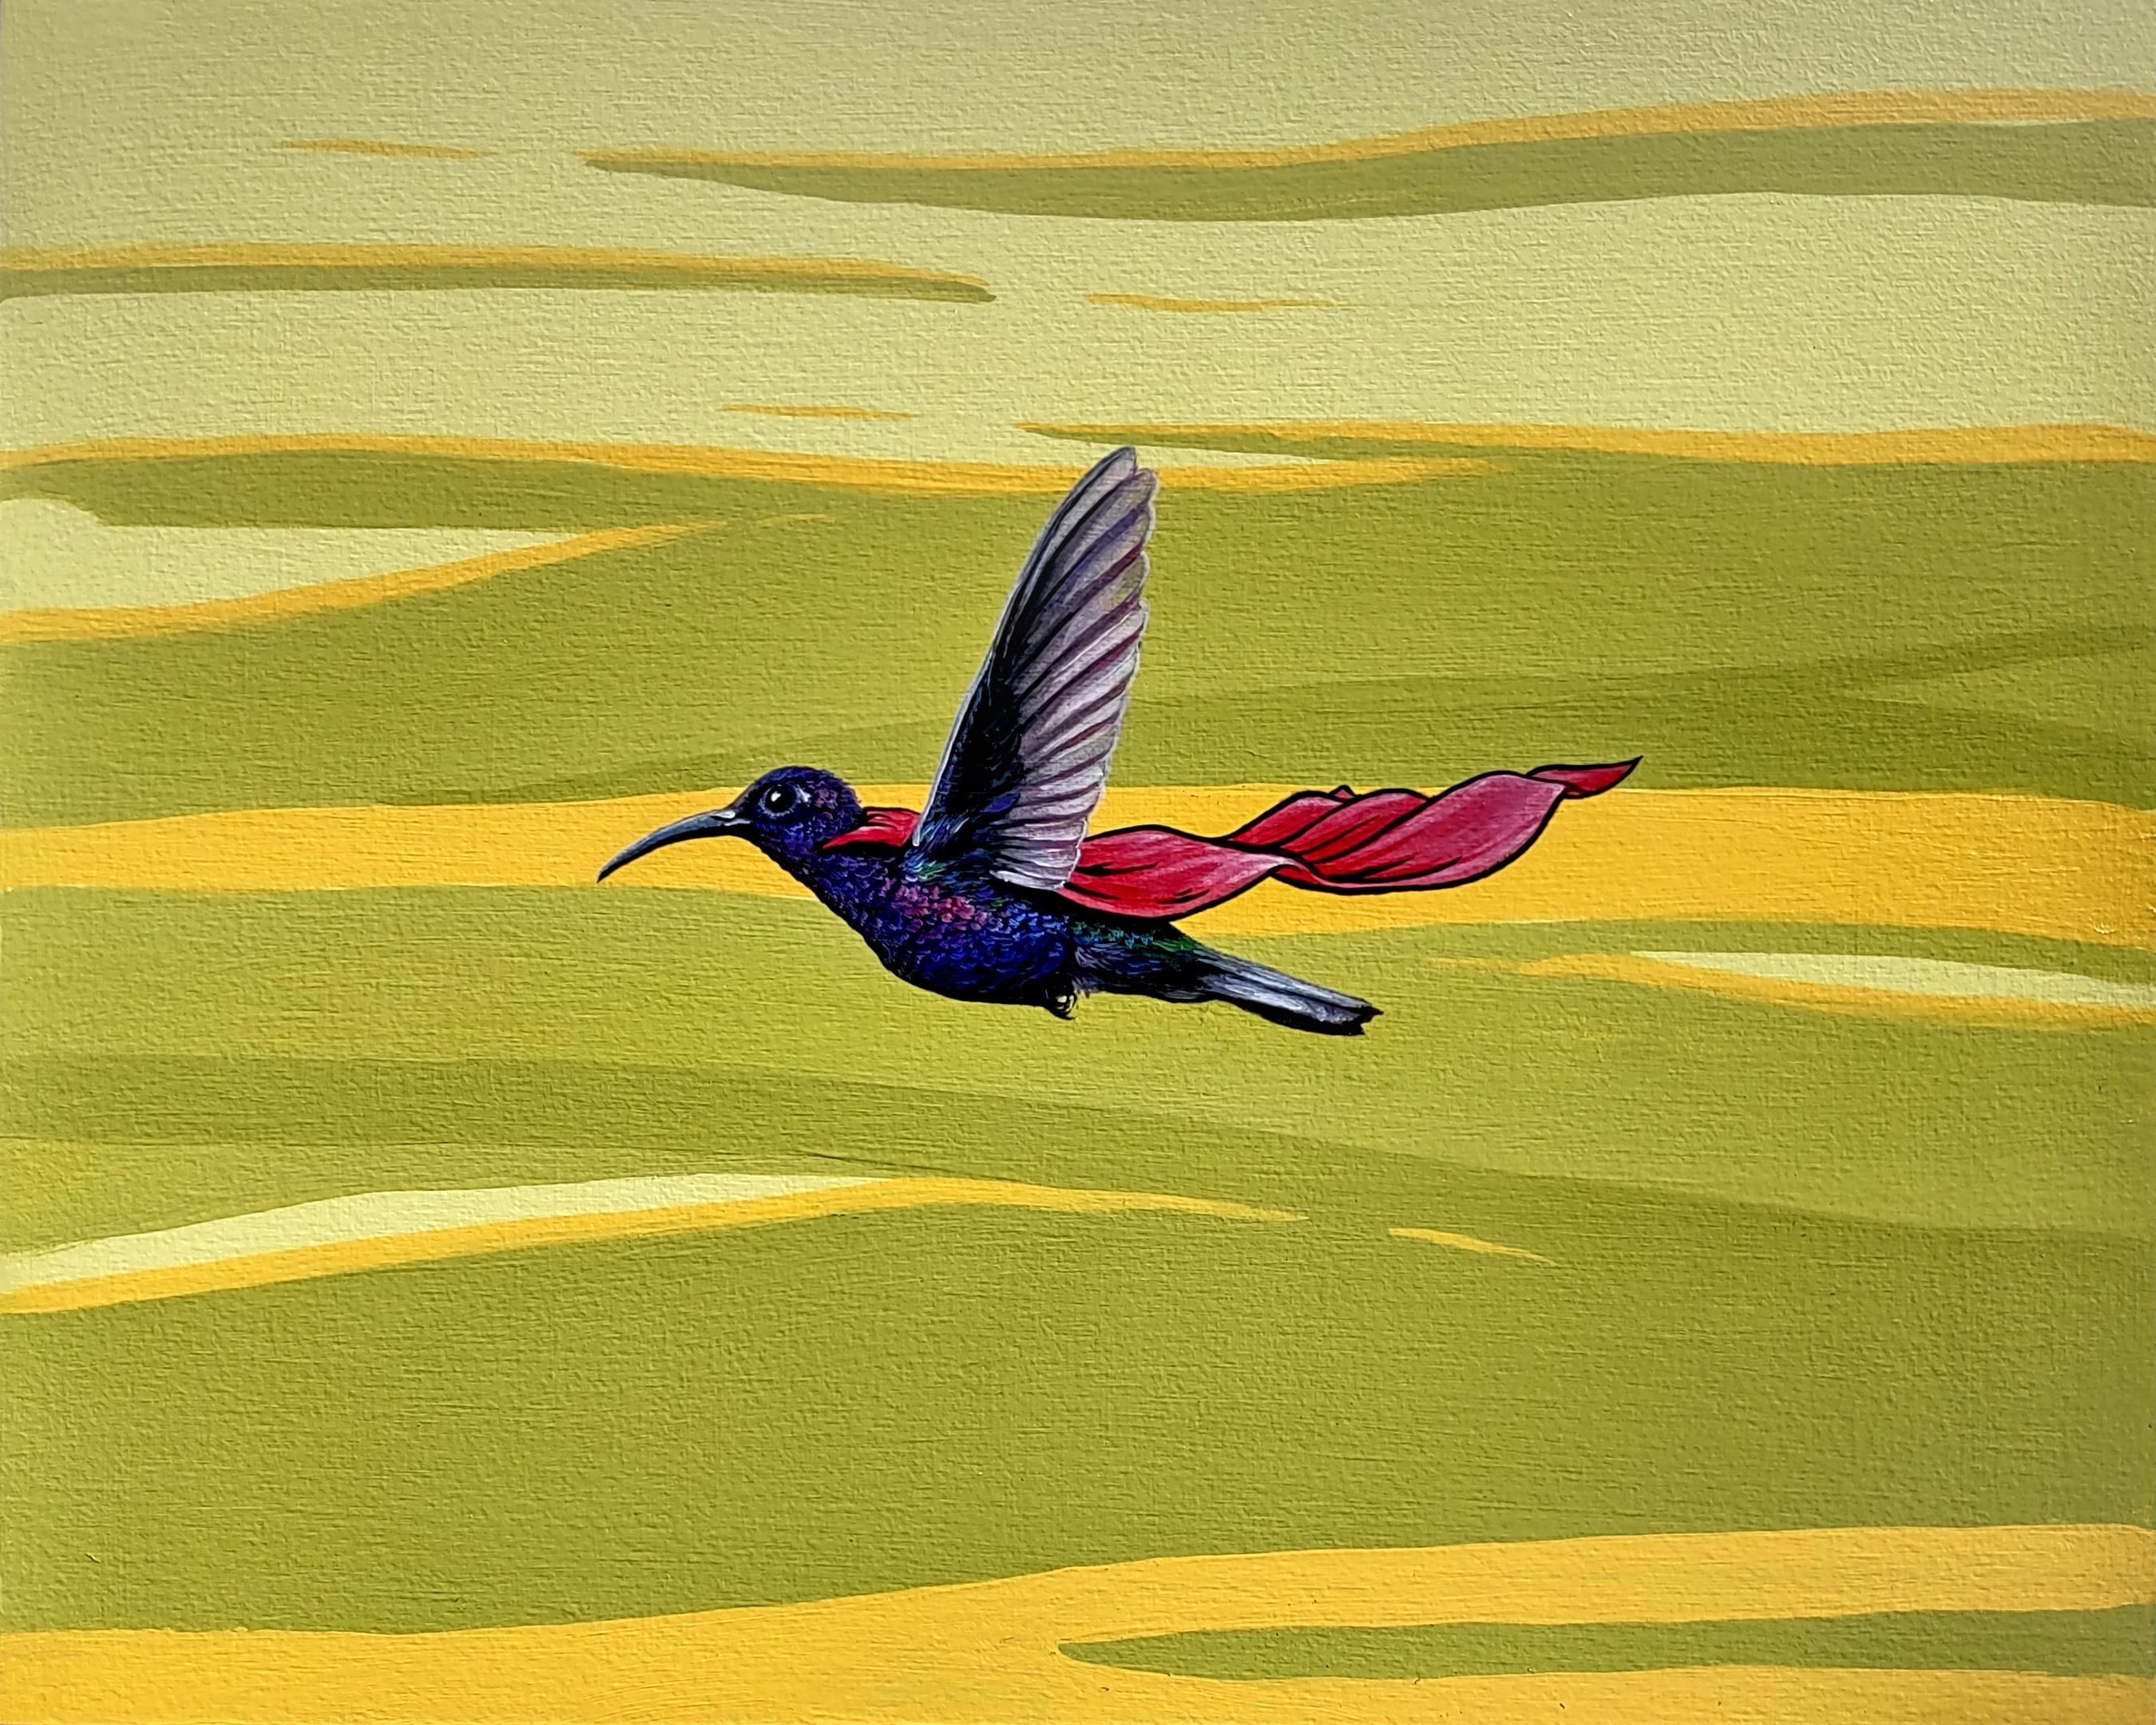 3rd Version (Ben Patterson) Figurative Painting - "Zippity", Hummingbird in Flight with a Red Cape Oil Painting